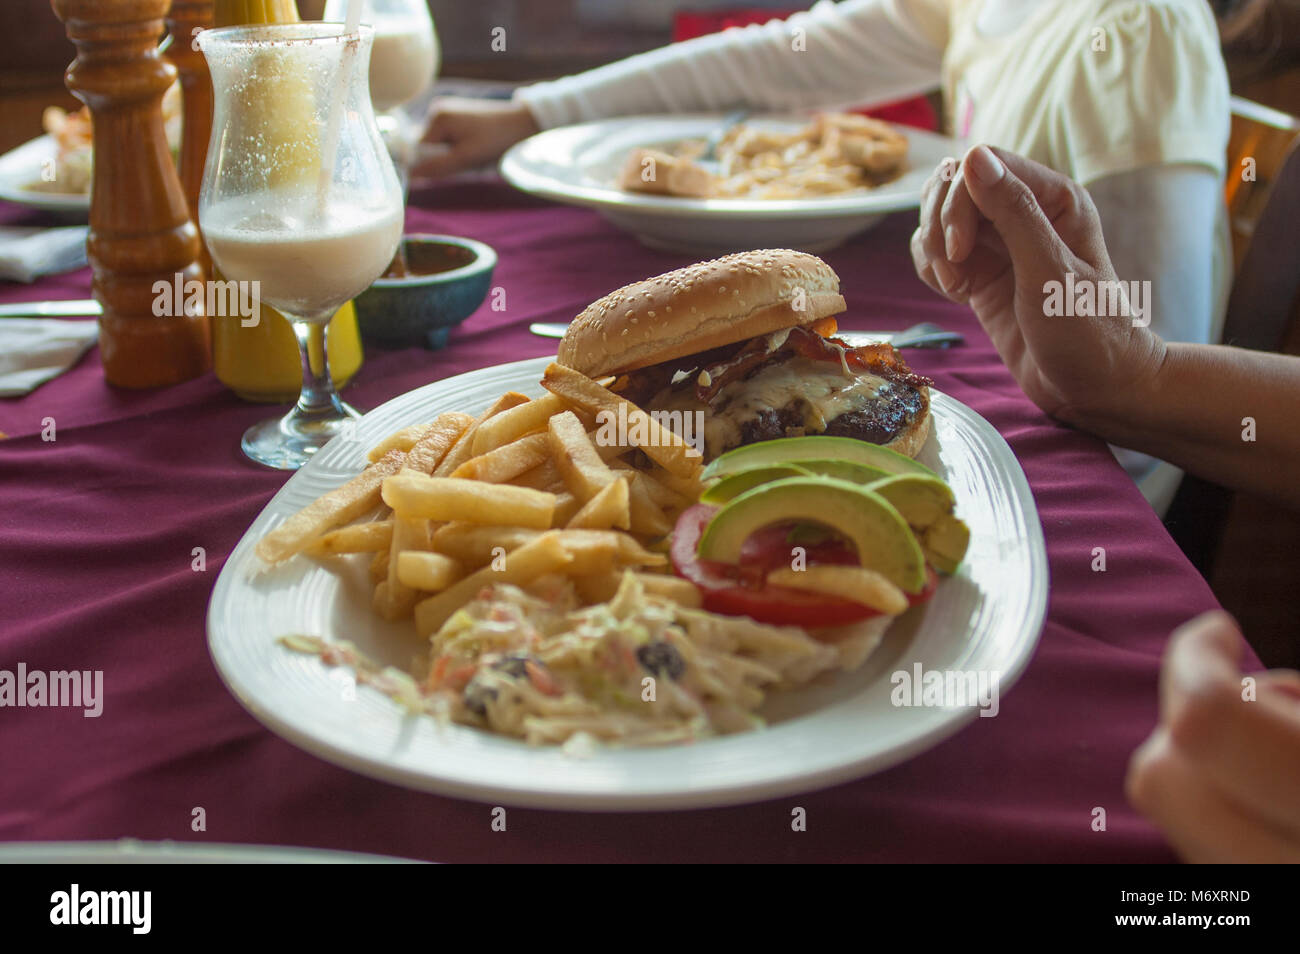 hamburger with fries on table as part of family dinner in a restaurant Stock Photo